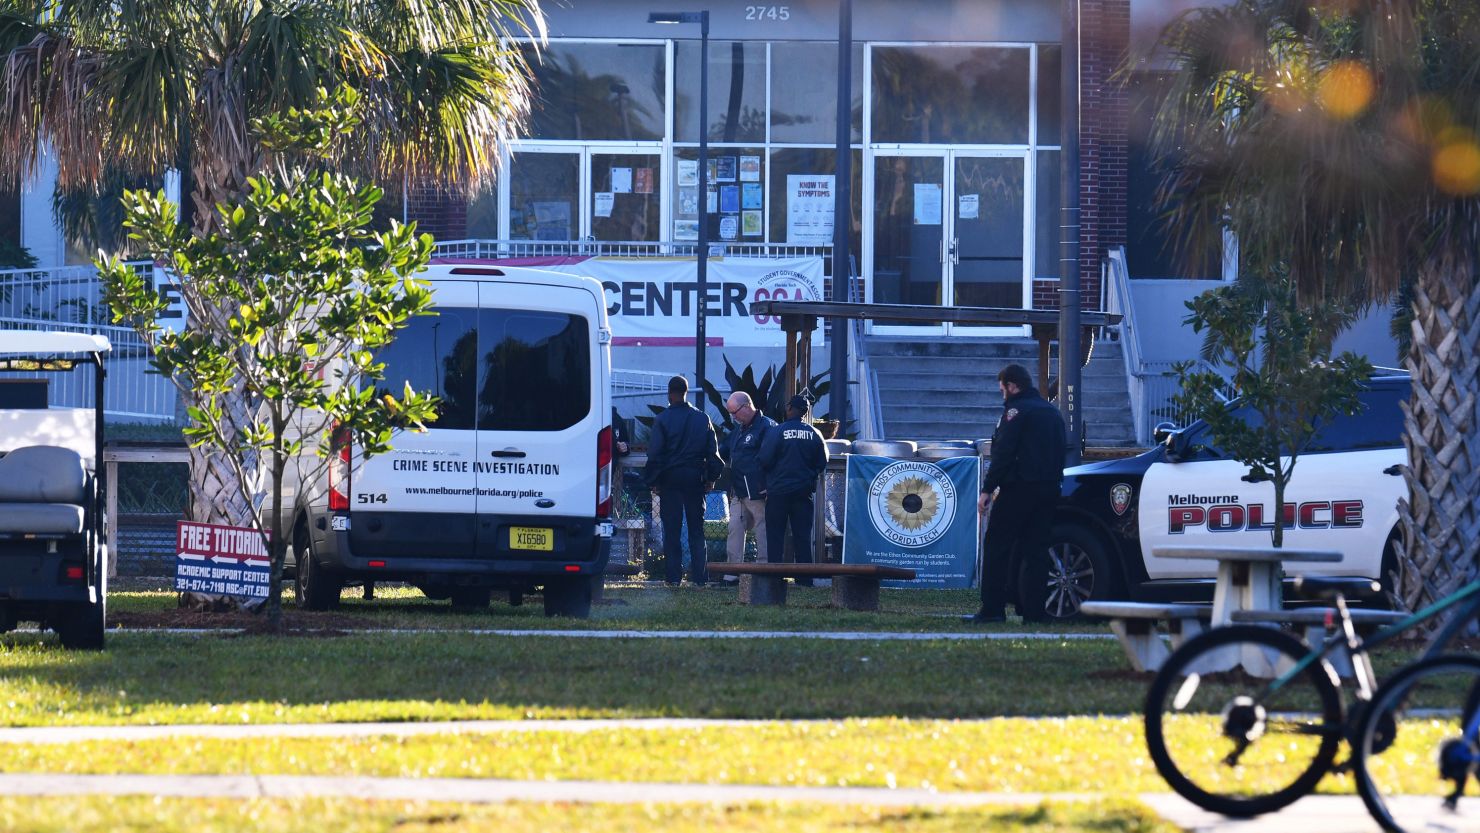 Police on the scene at the Florida Institute of Technology